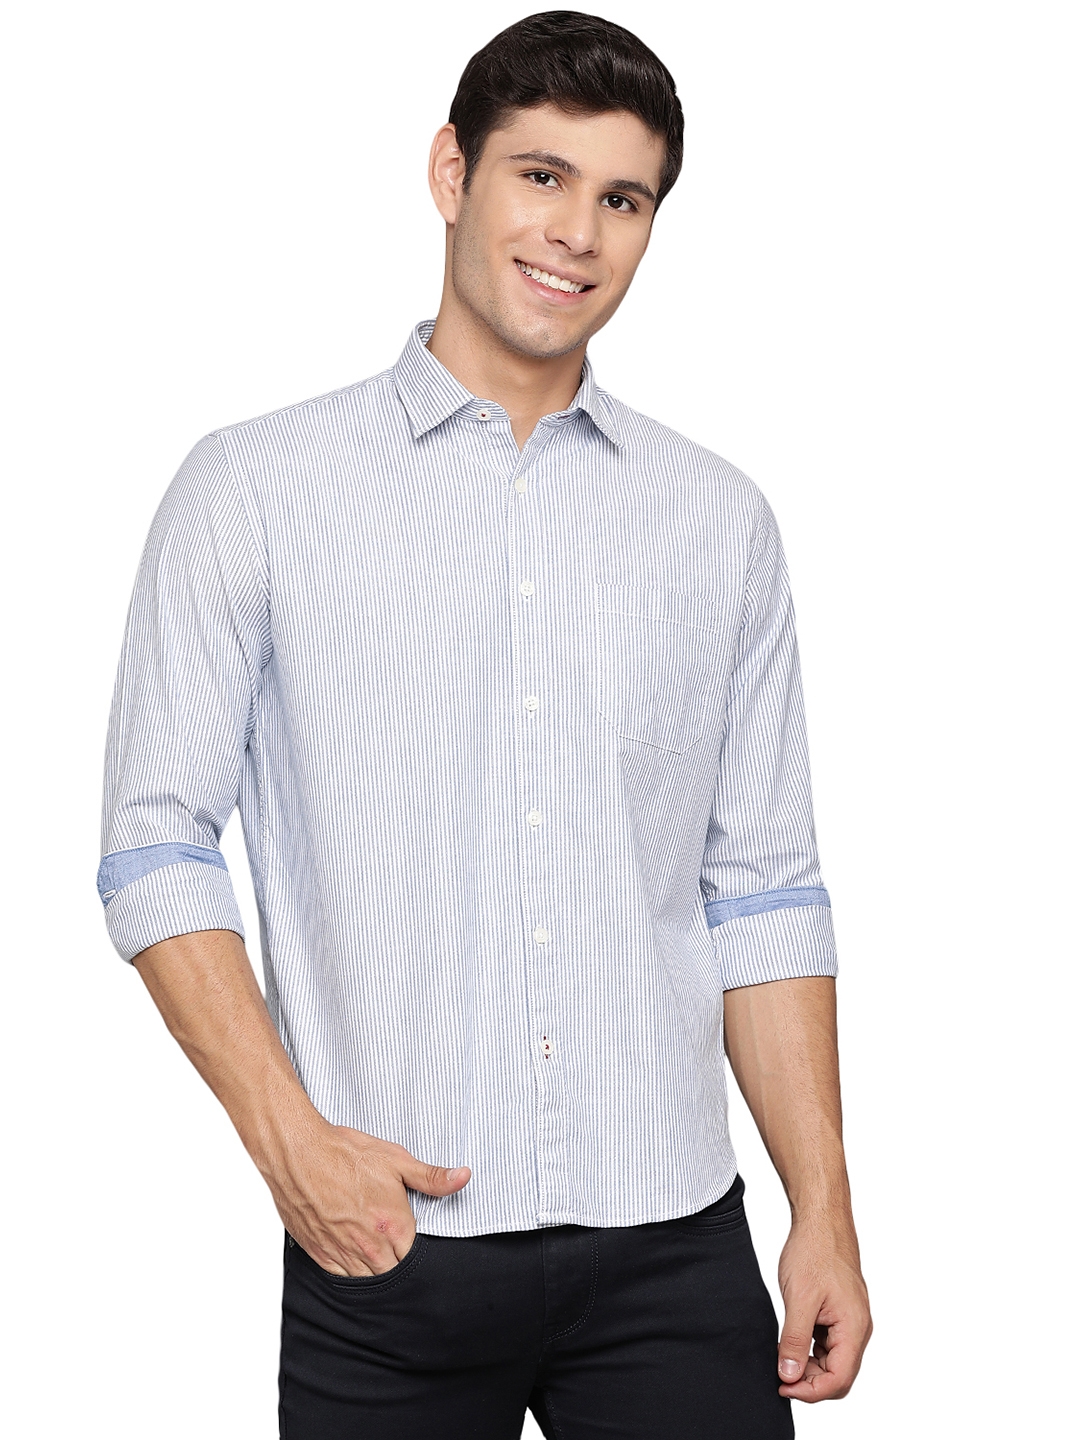 Victorial Blue Striped Slim Fit Casual Shirt | Greenfibre